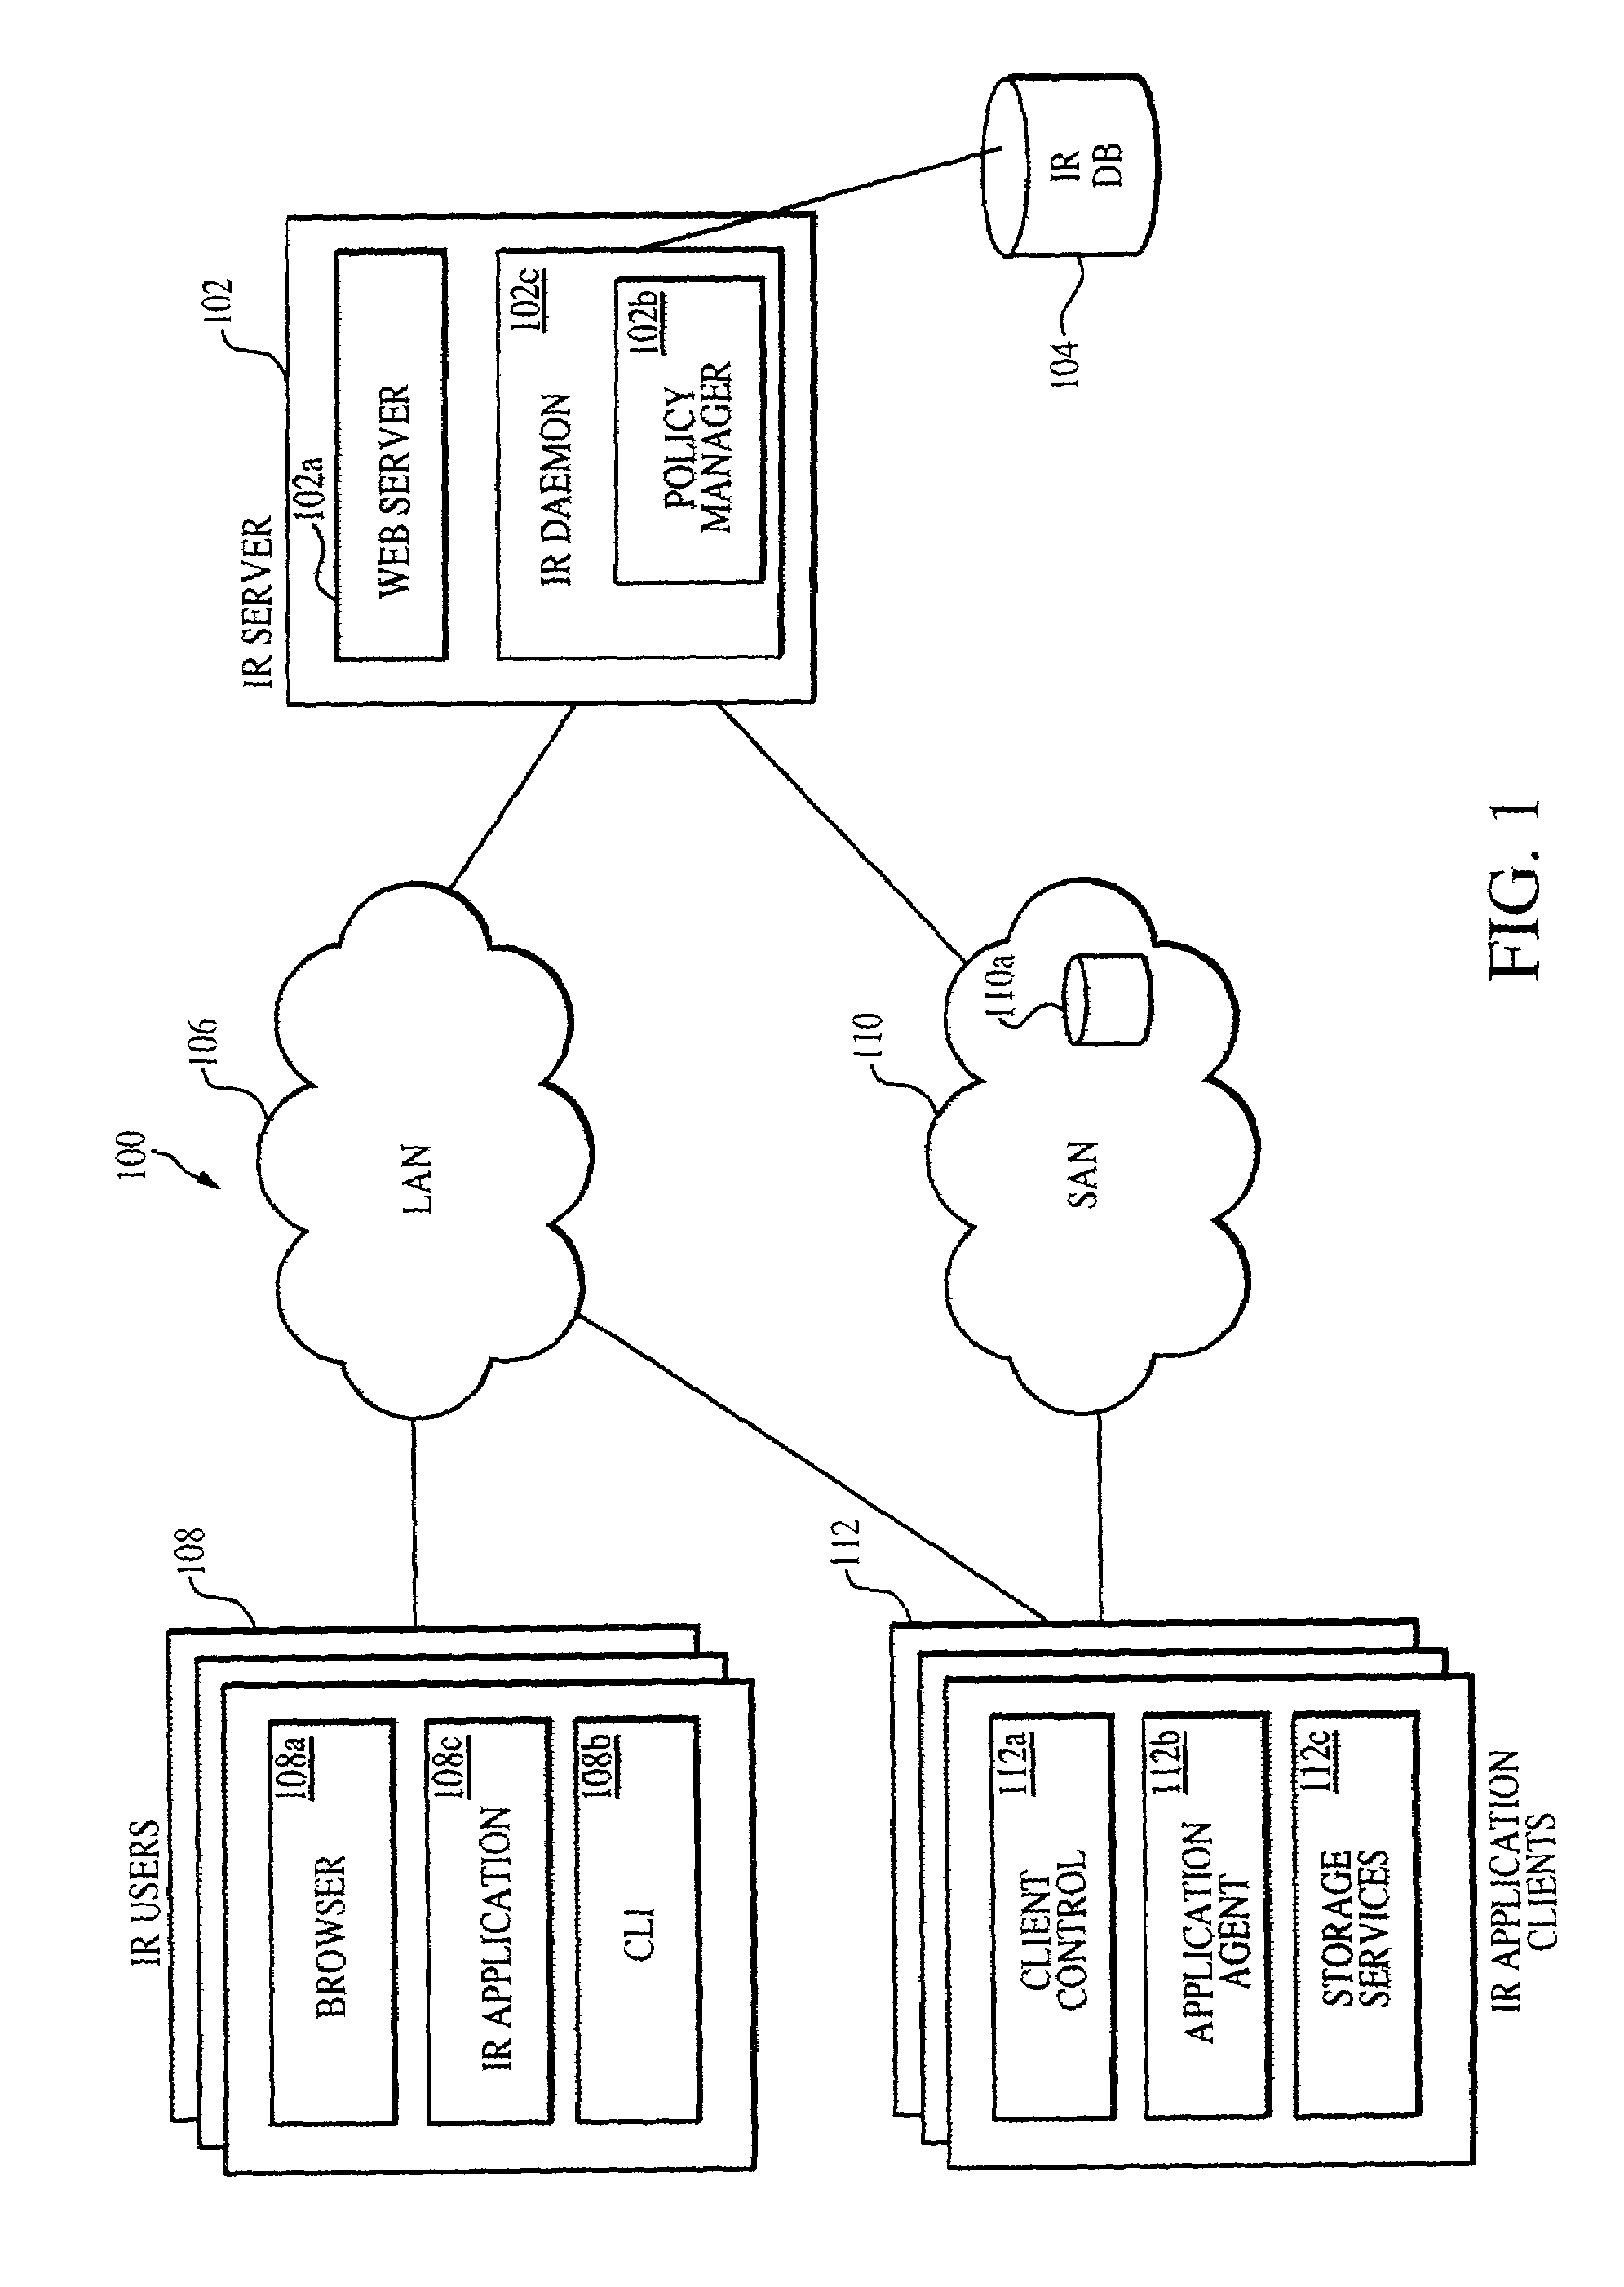 Information replication system mounting partial database replications